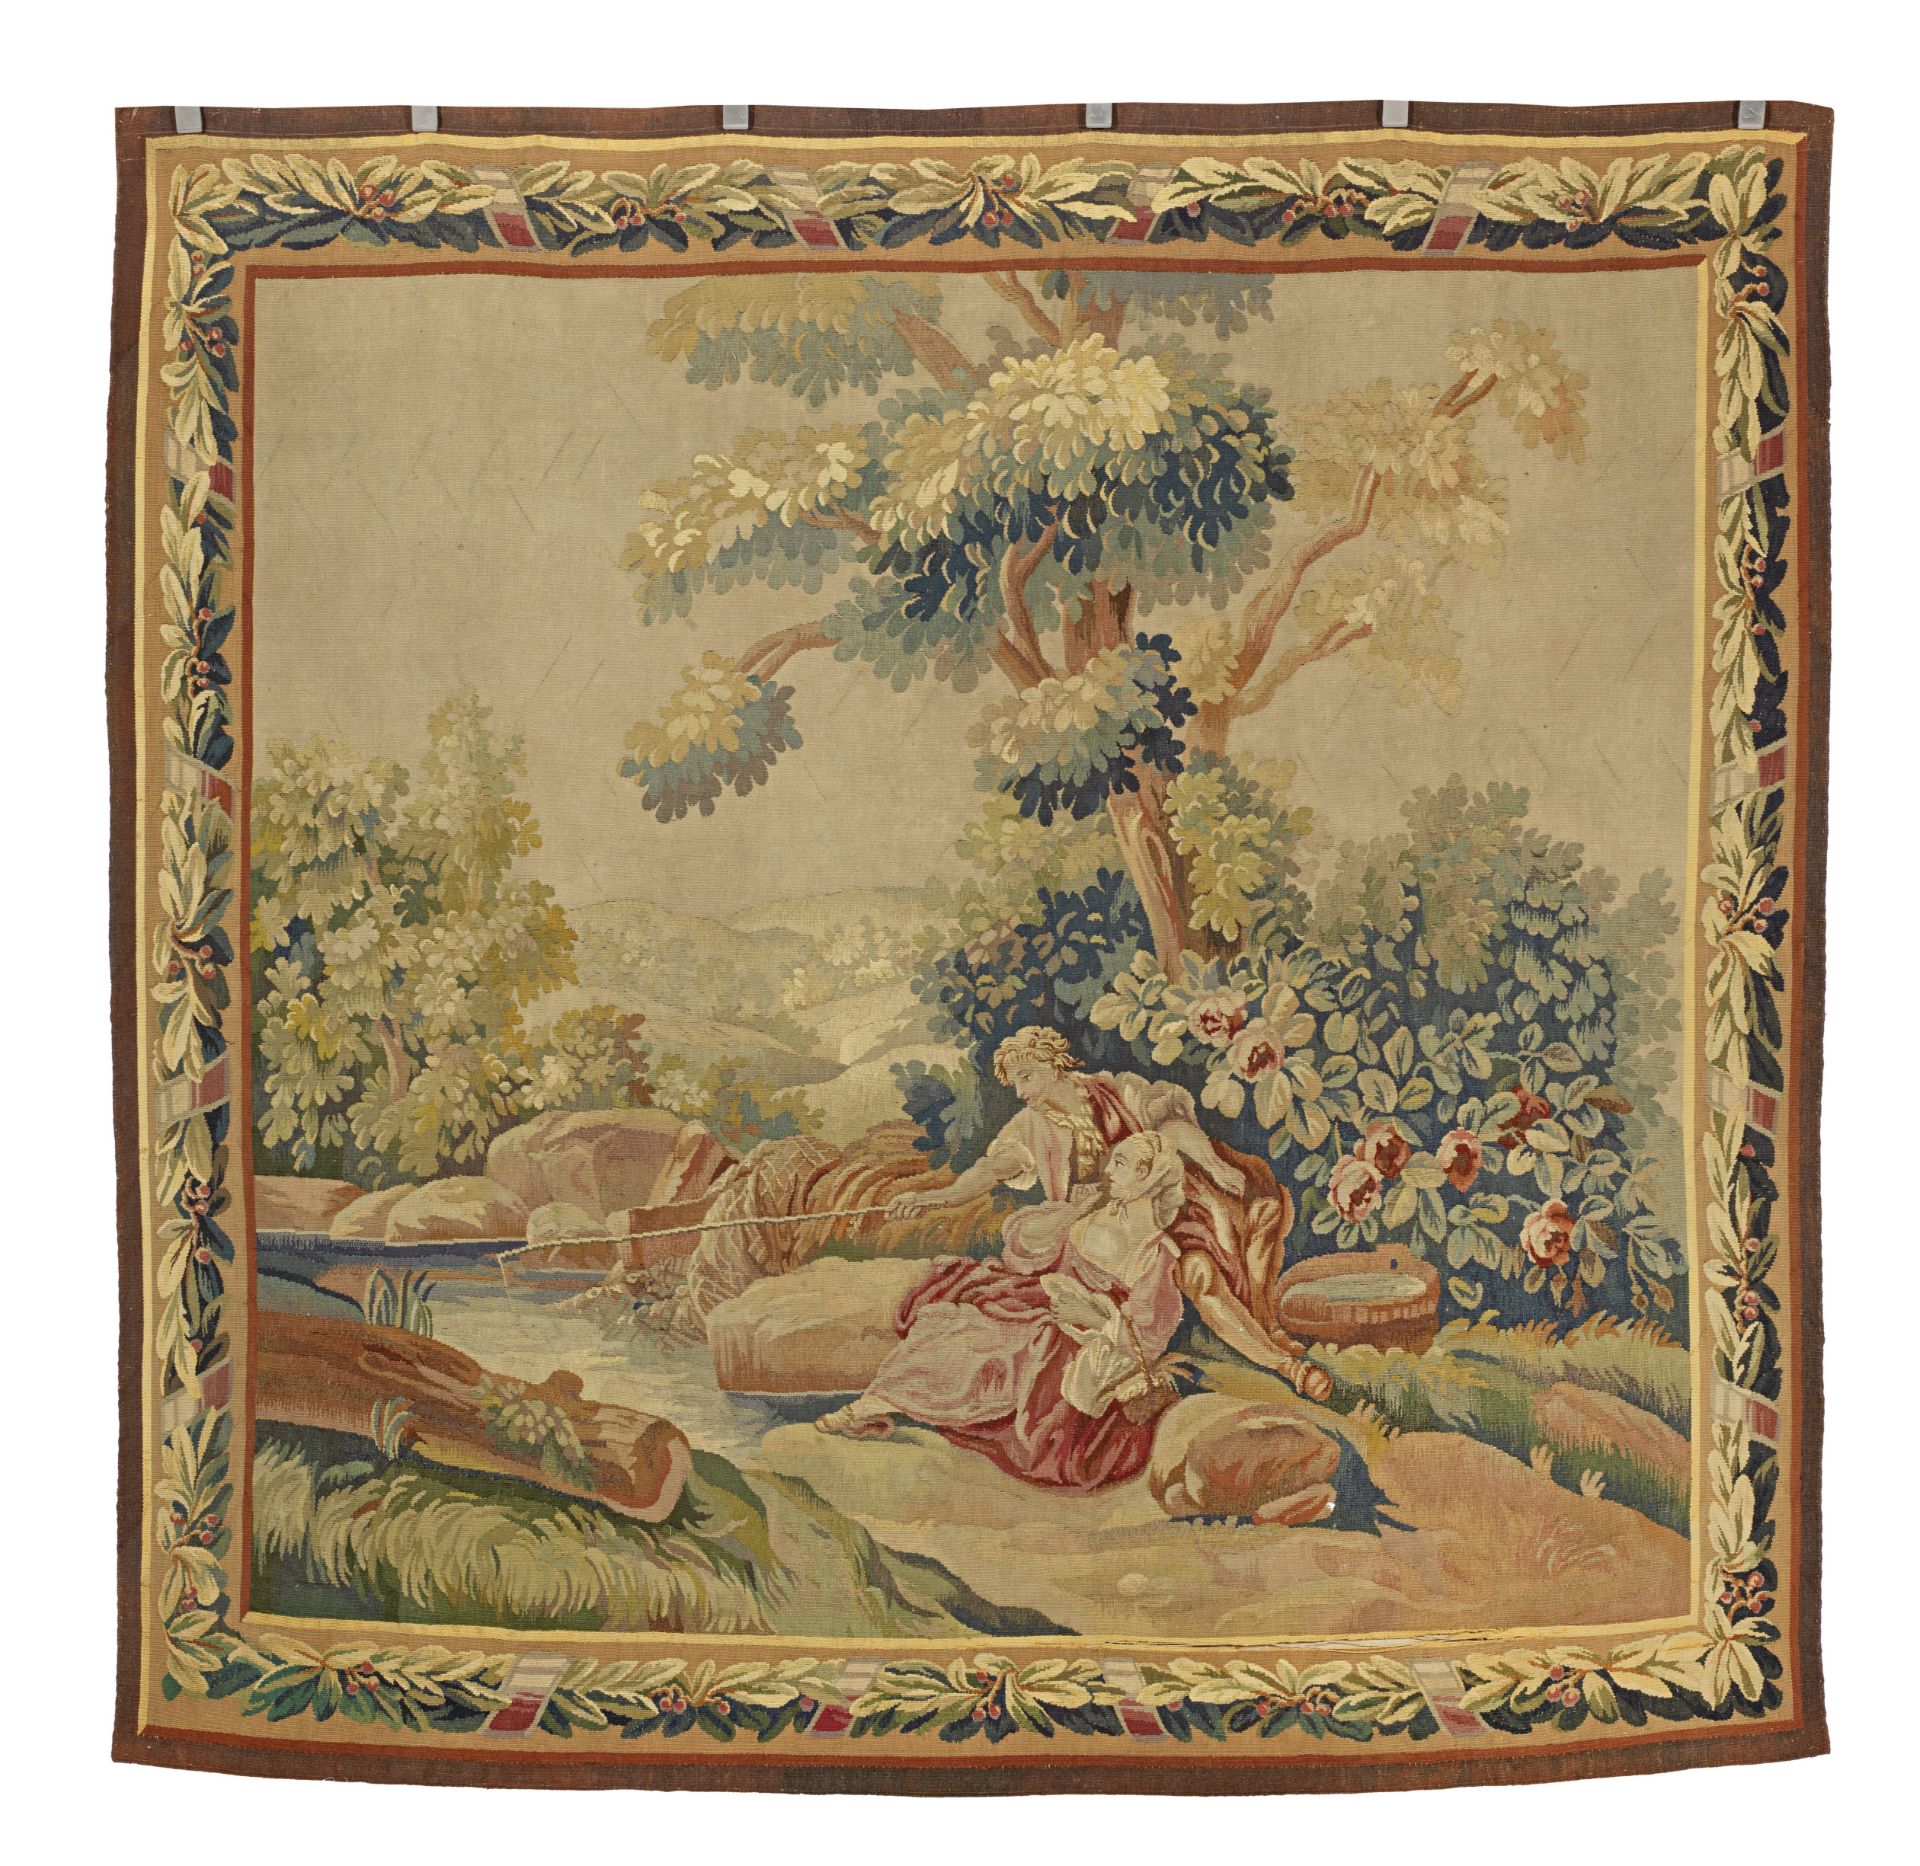 An Aubusson tapestry France, probably late 18th century 218cm x 214.5cm